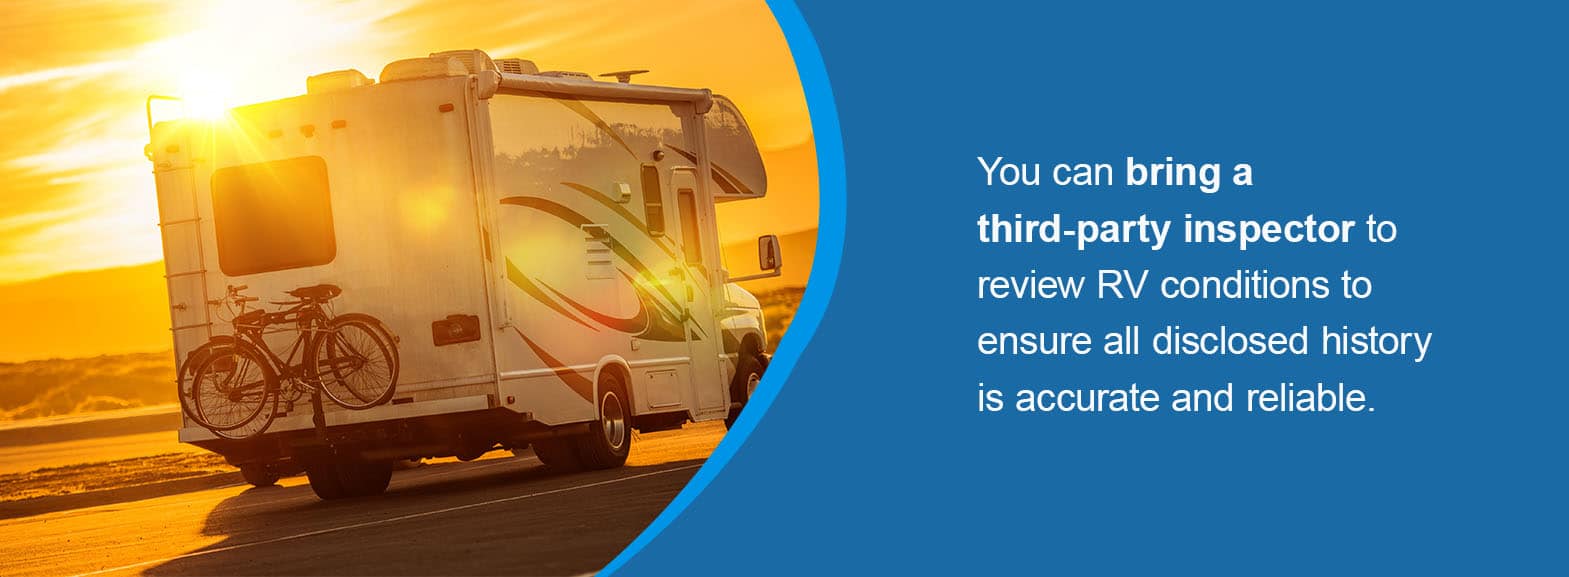 You can bring a third-party inspector to review RV conditions to ensure all disclosed history is accurate and reliable. 